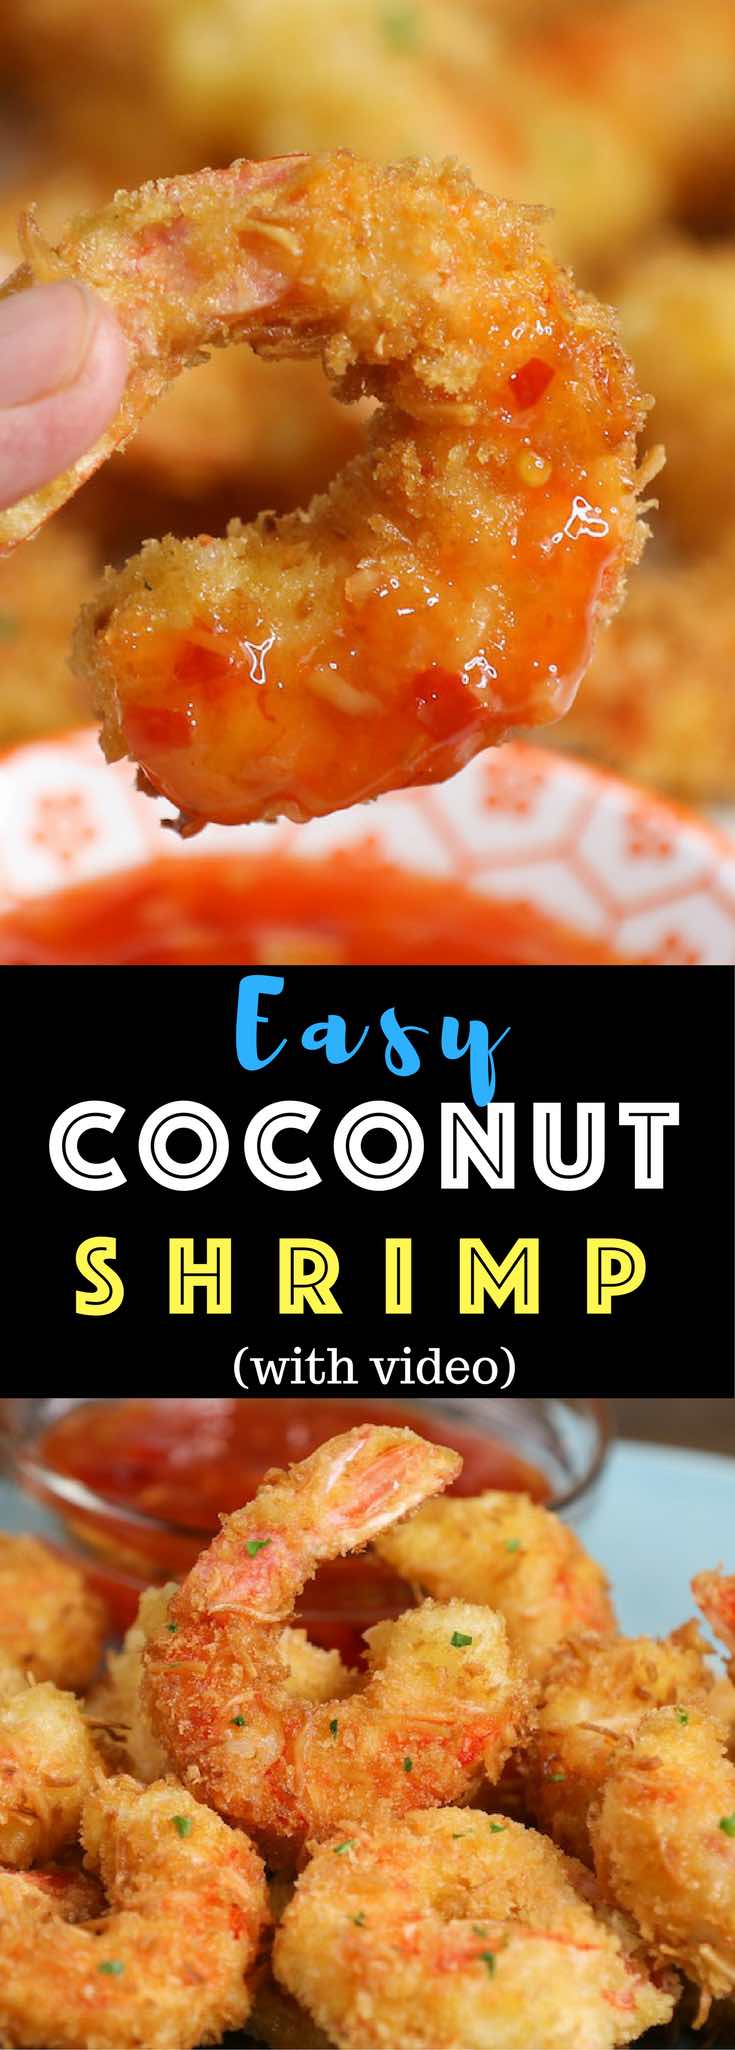 These Coconut Shrimp make an irresistible appetizer that’s tender on the inside, and crispy, sweet and crunchy on the outside. They’re mouthwateringly delicious and will be the first to go at a party! 